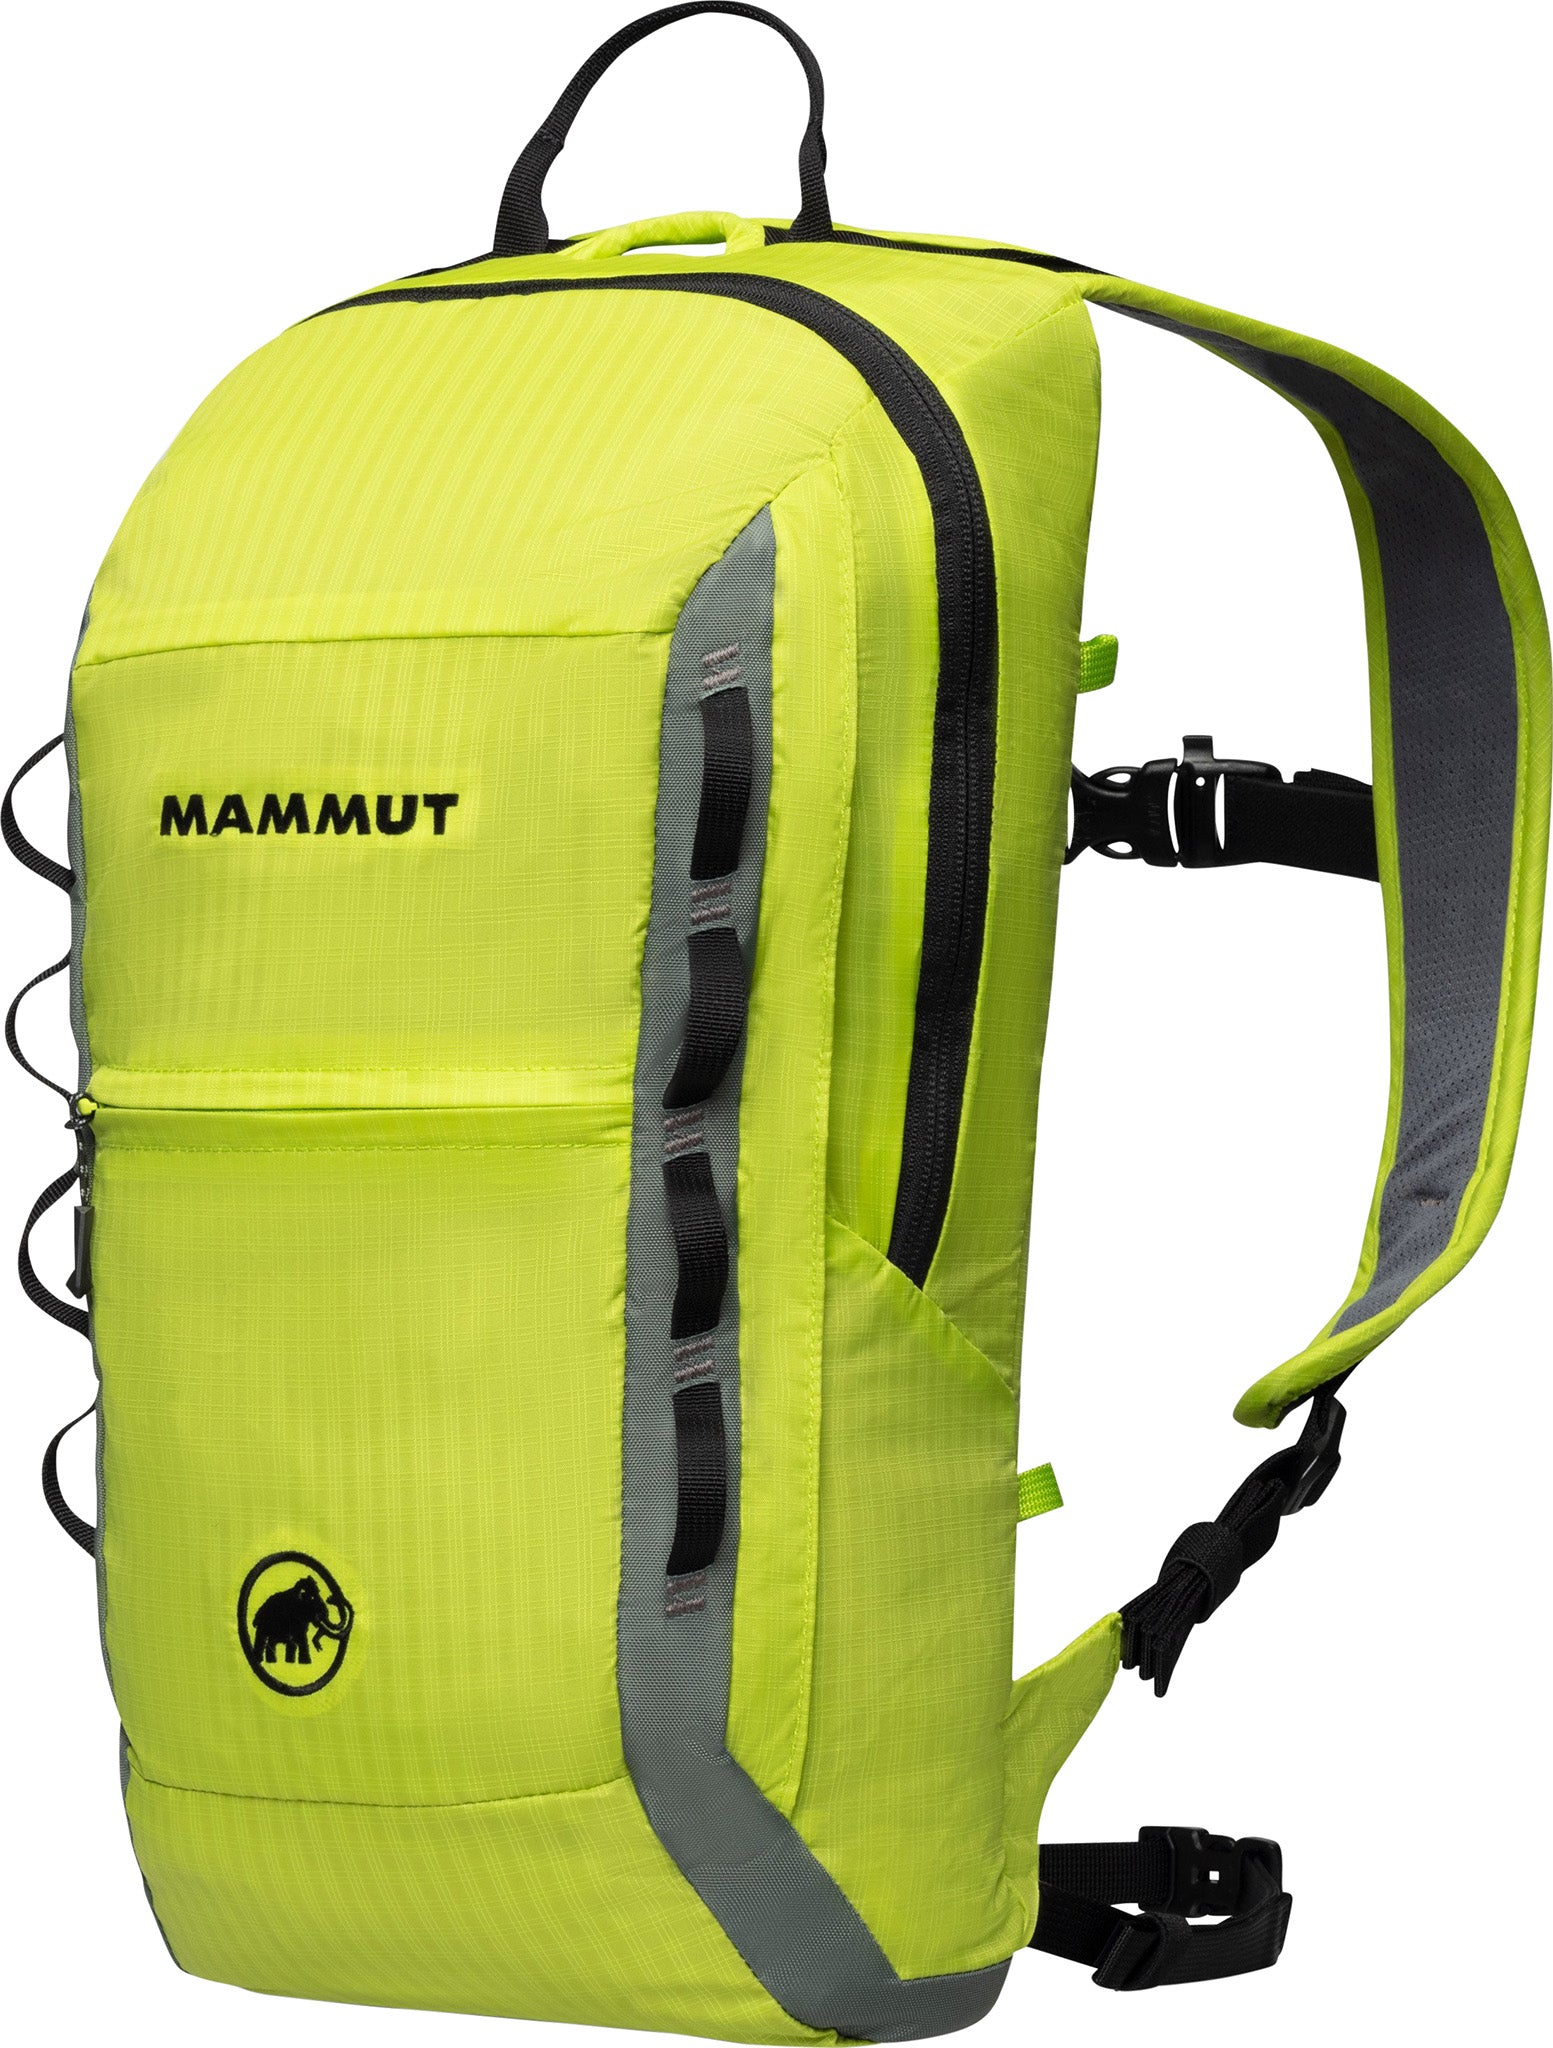 Unchanged dramatic Go hiking mammut neon light 12l backpack review ...